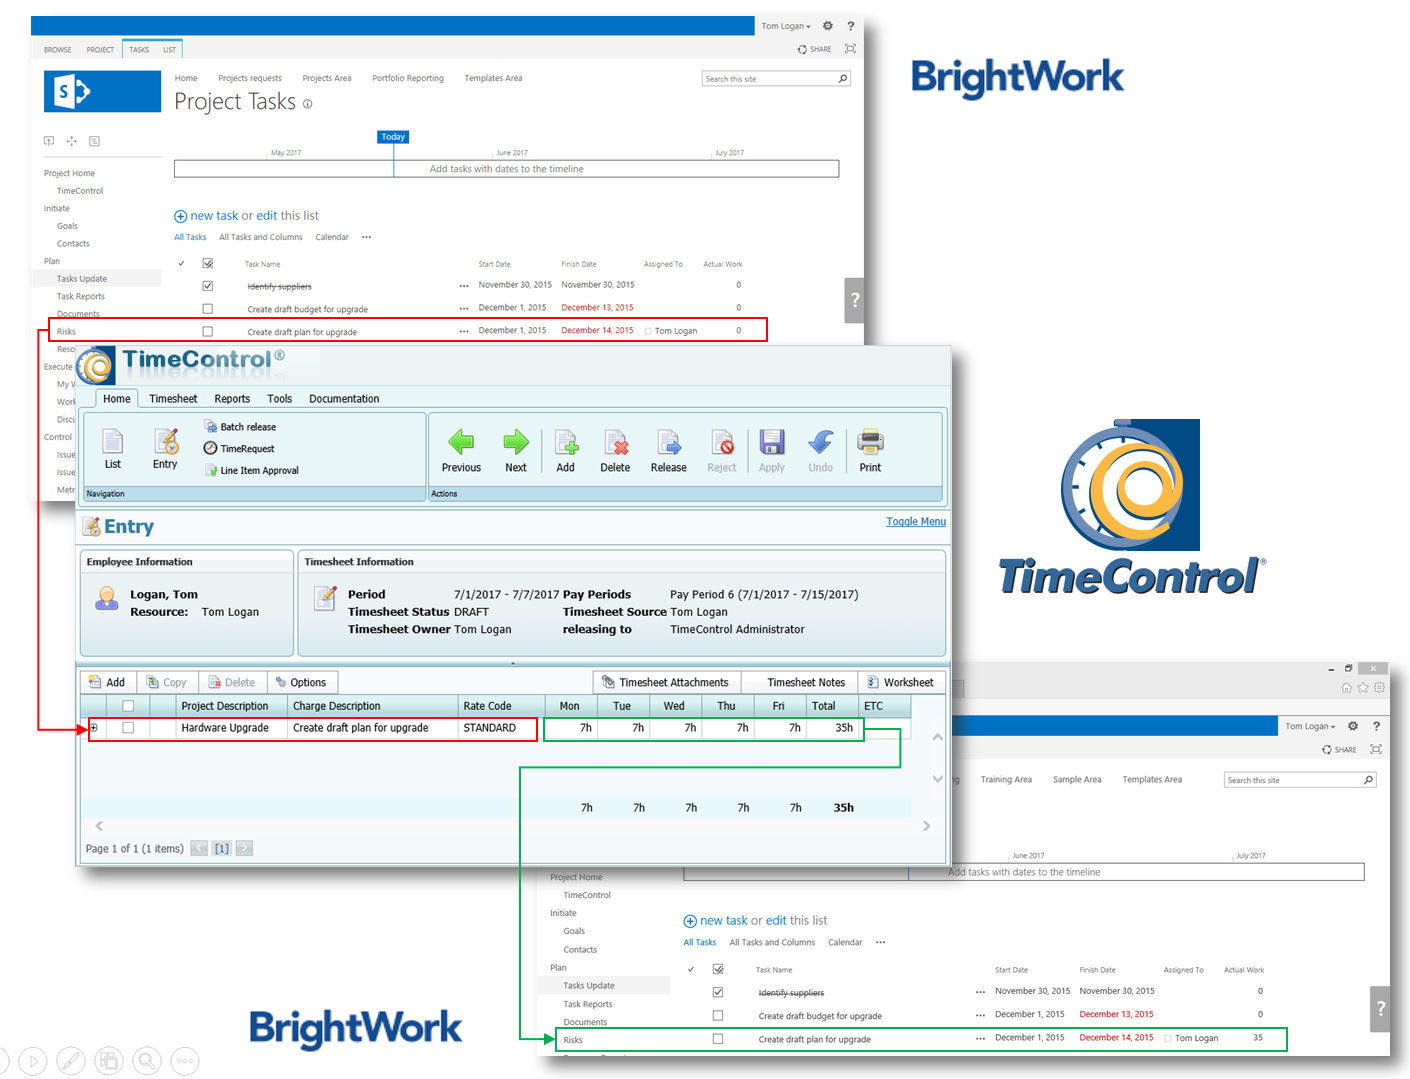 TimeControl and BrightWork